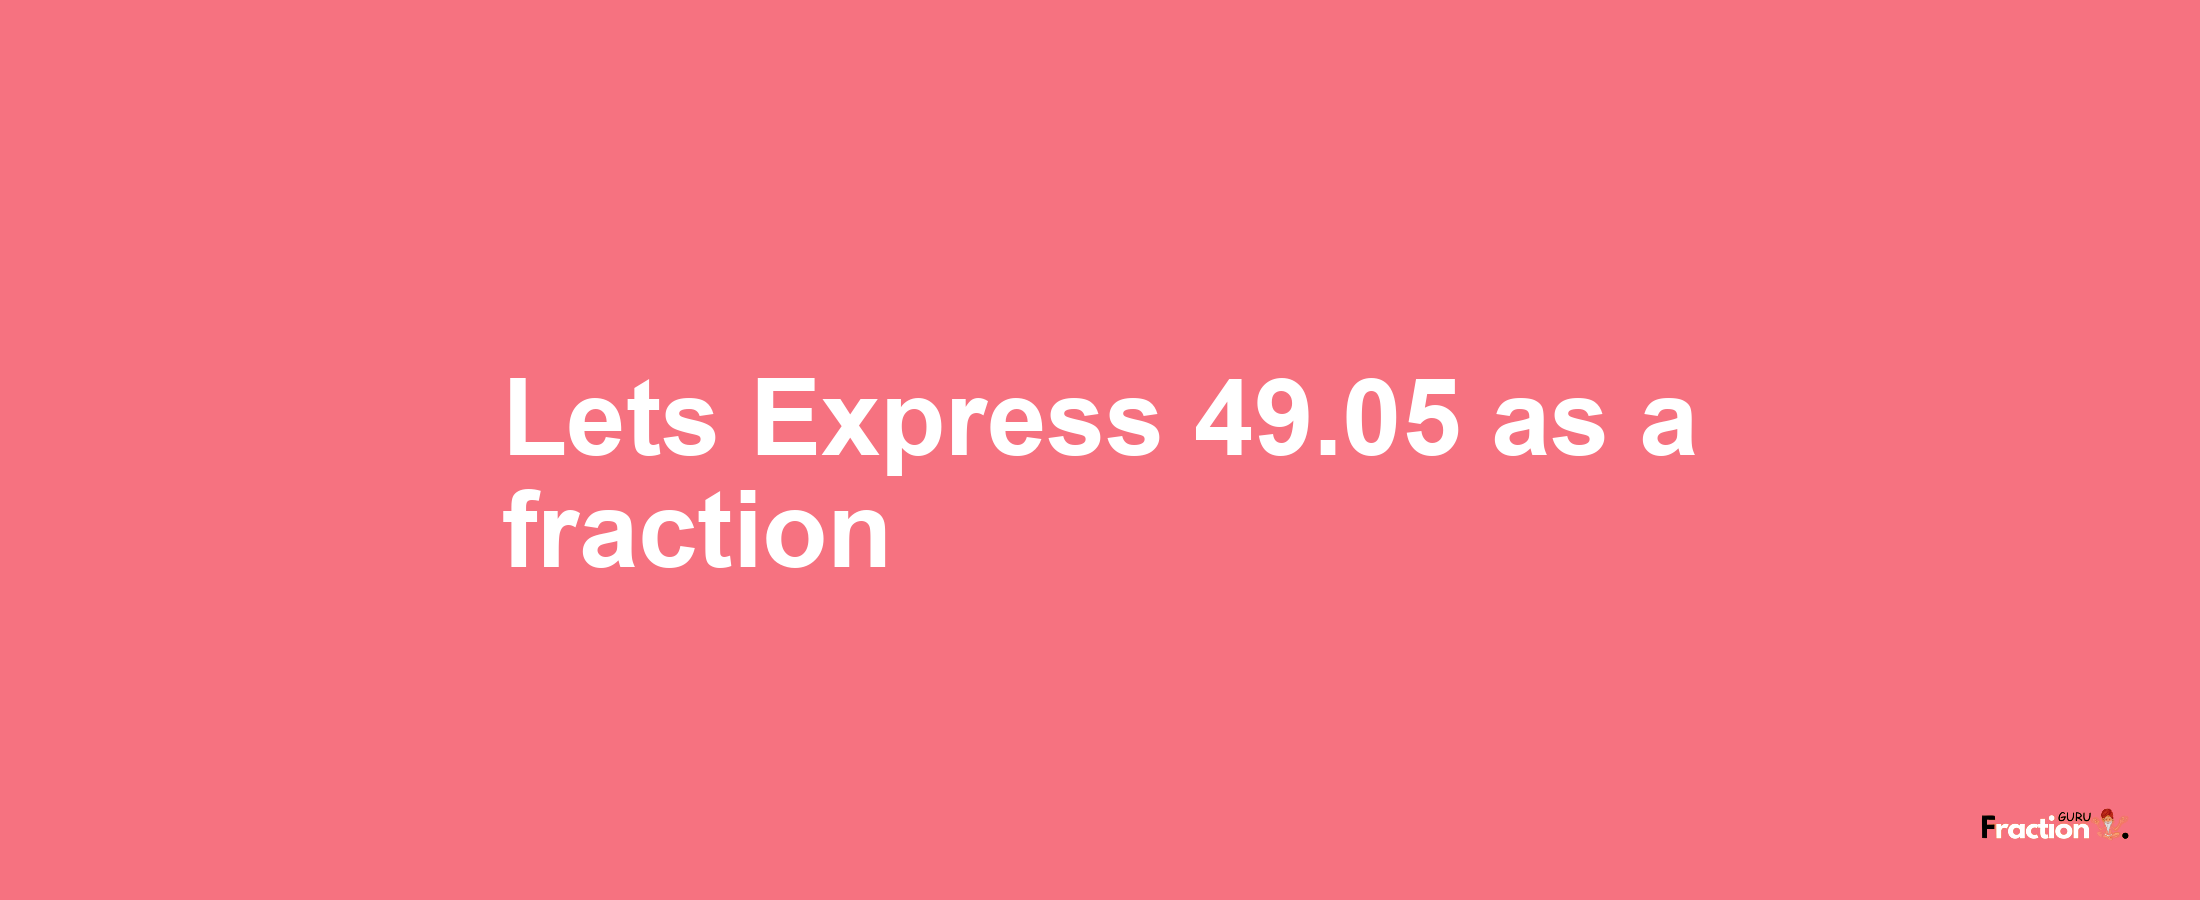 Lets Express 49.05 as afraction